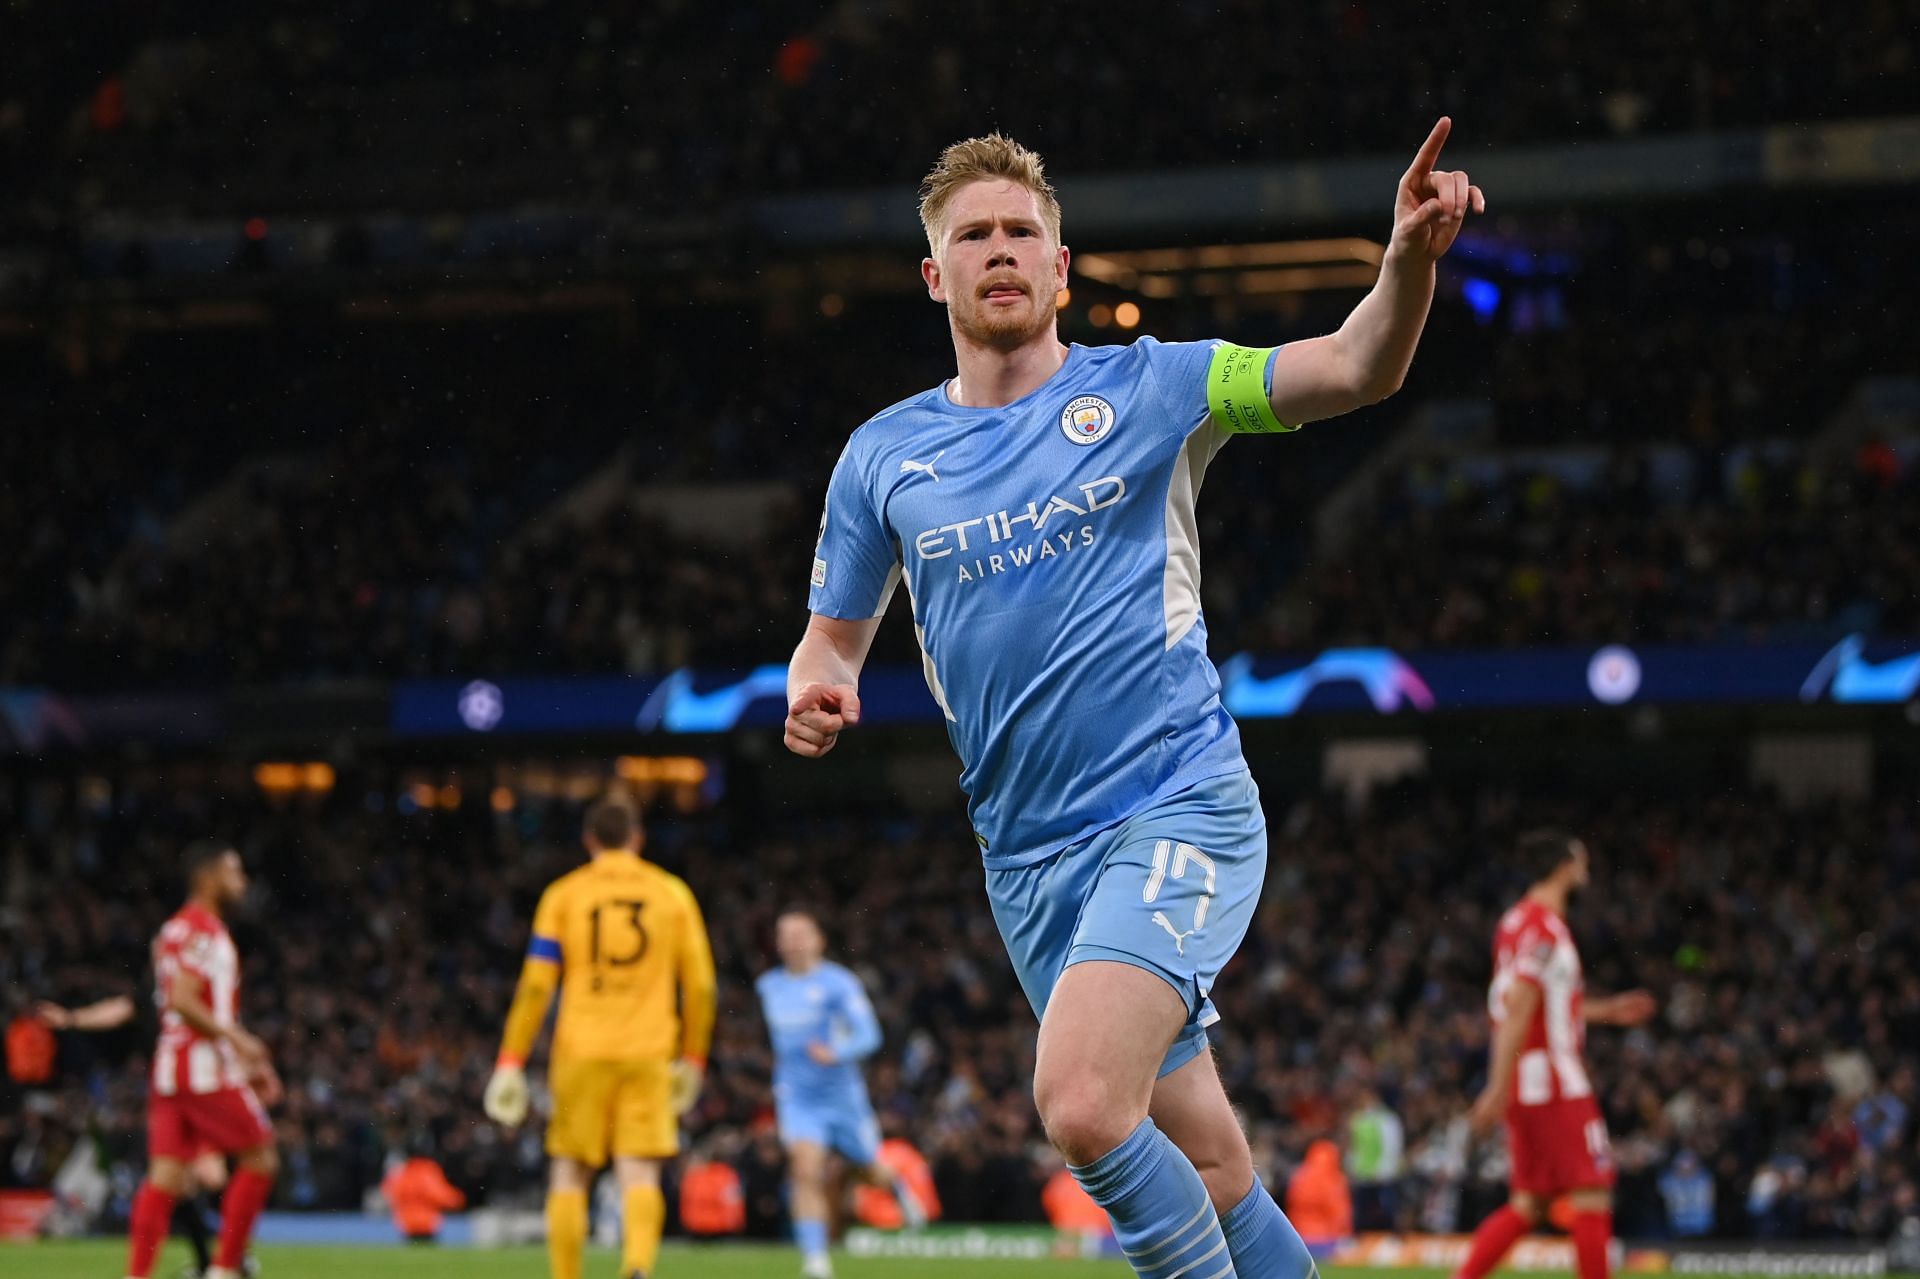 Kevin De Bruyne will look to inspire his team past Liverpool on Sunday.